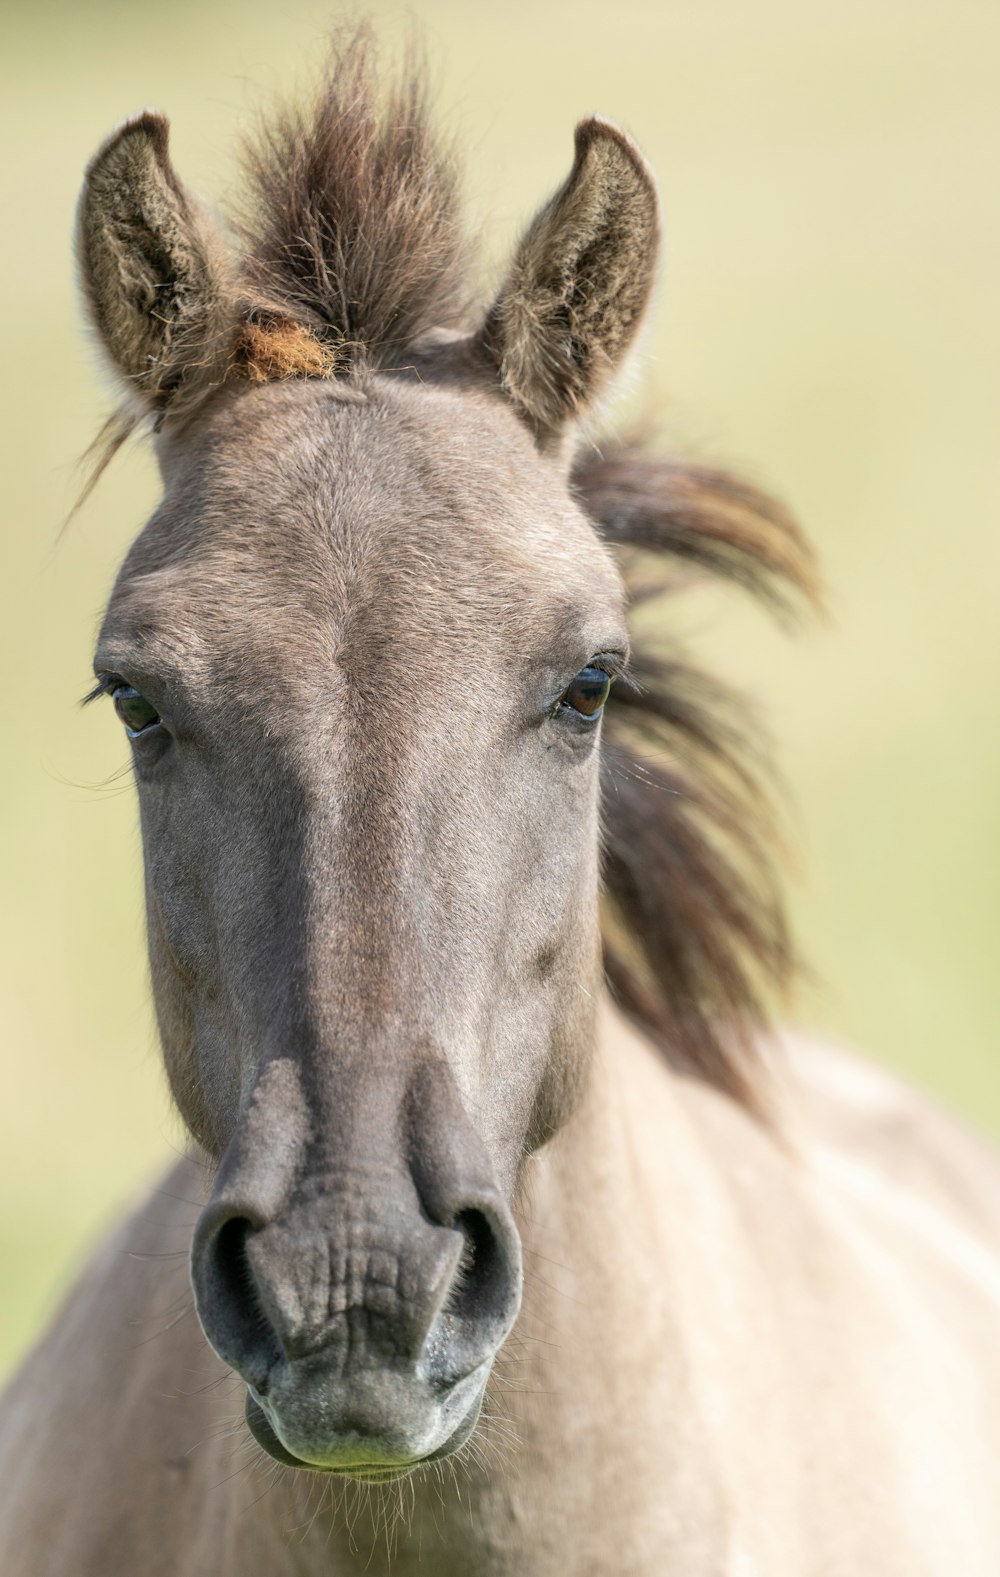 a close up of a horse with a blurry background